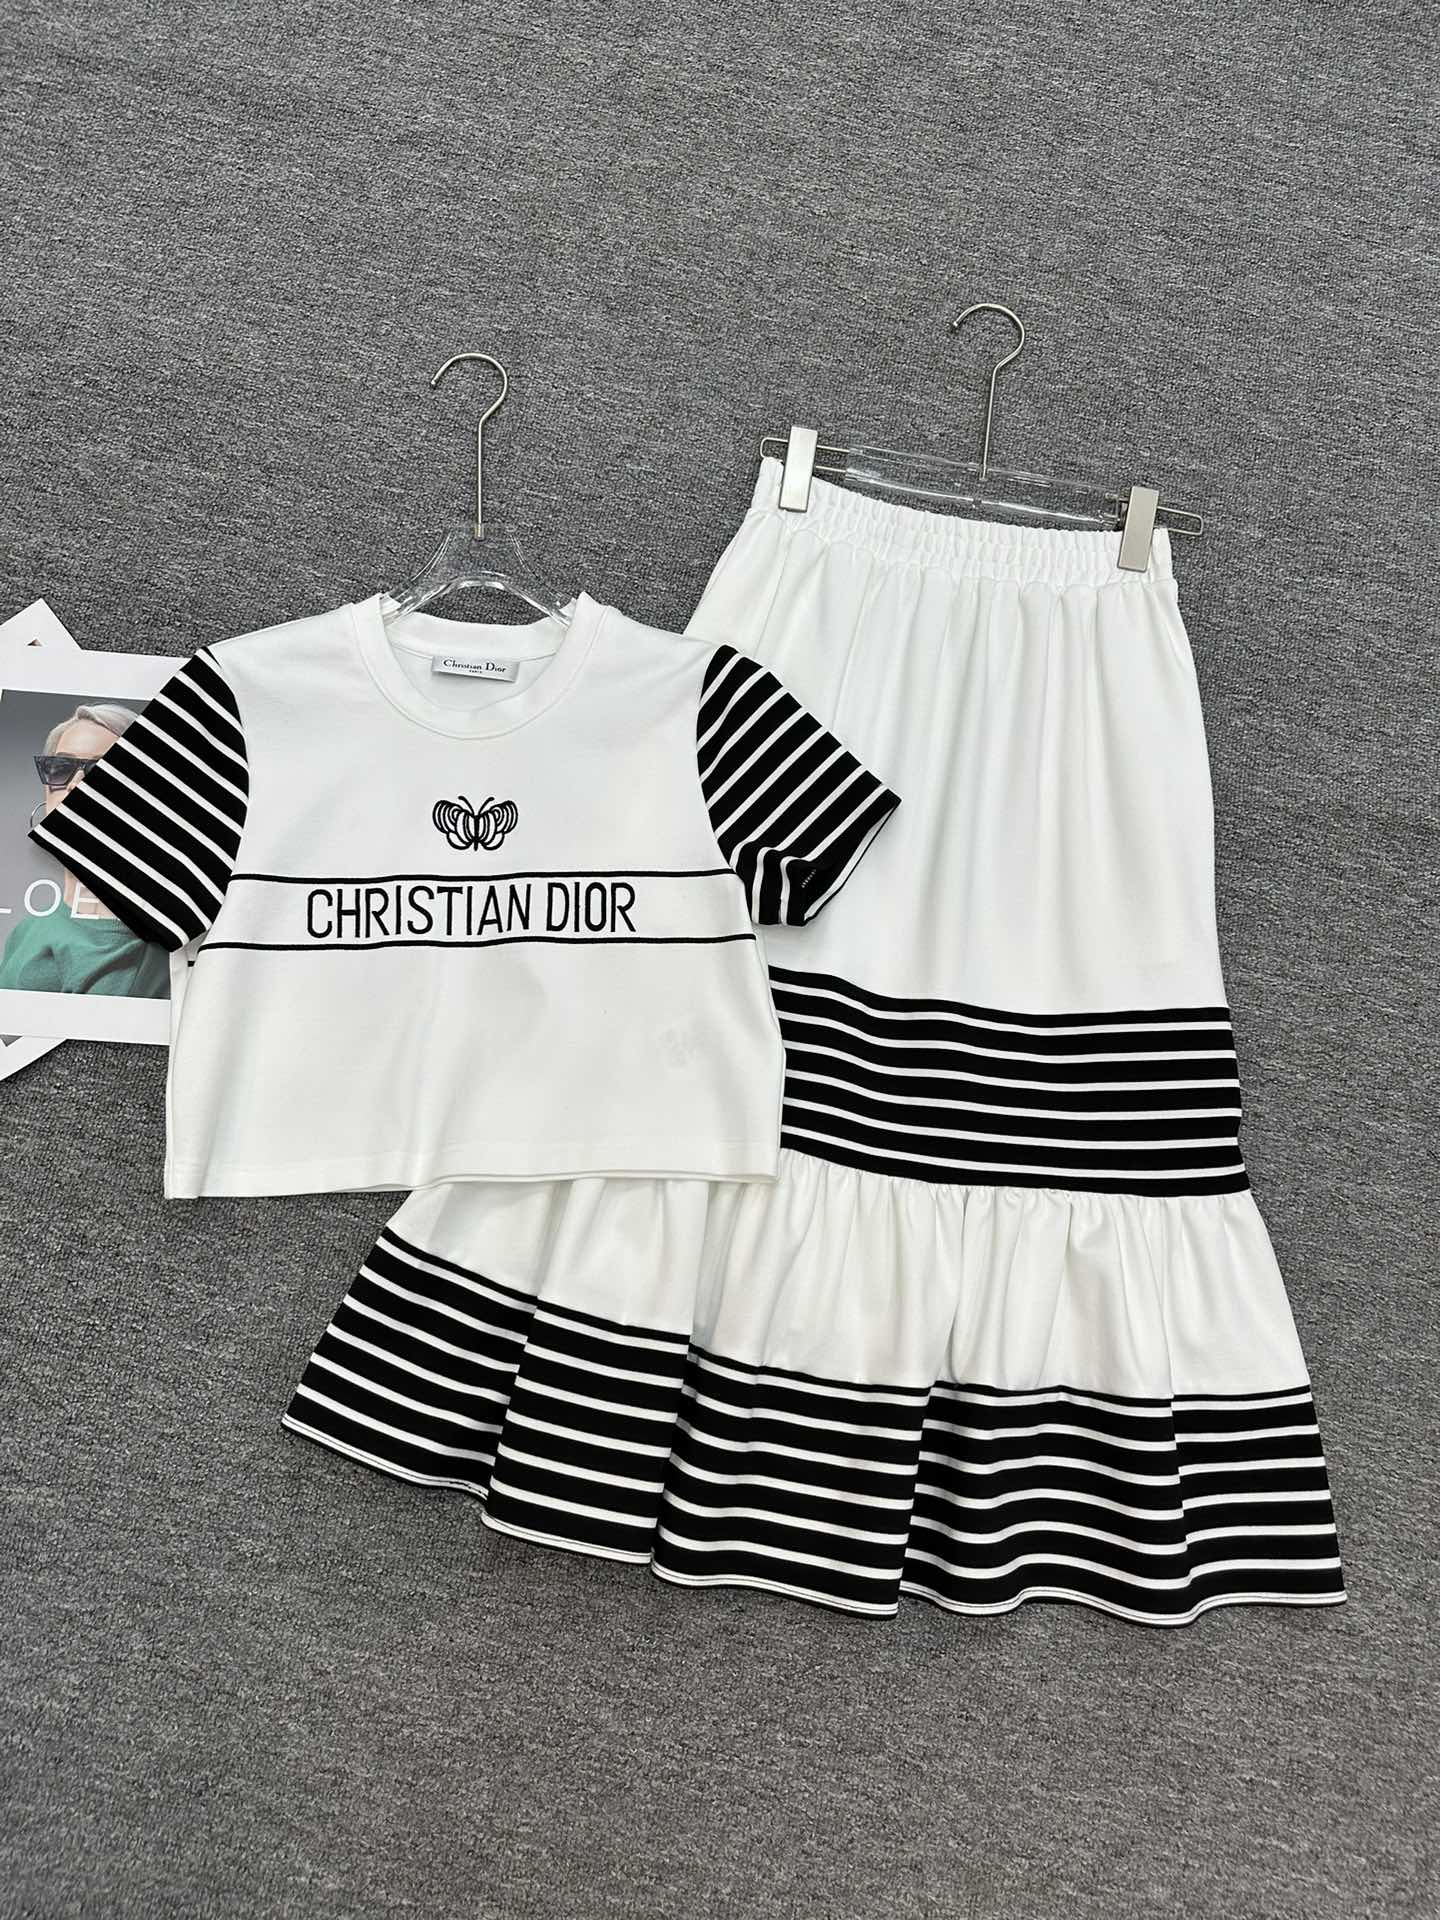 Wholesale
 Dior Clothing Skirts T-Shirt AAAA Customize
 Embroidery Spring/Summer Collection Fashion